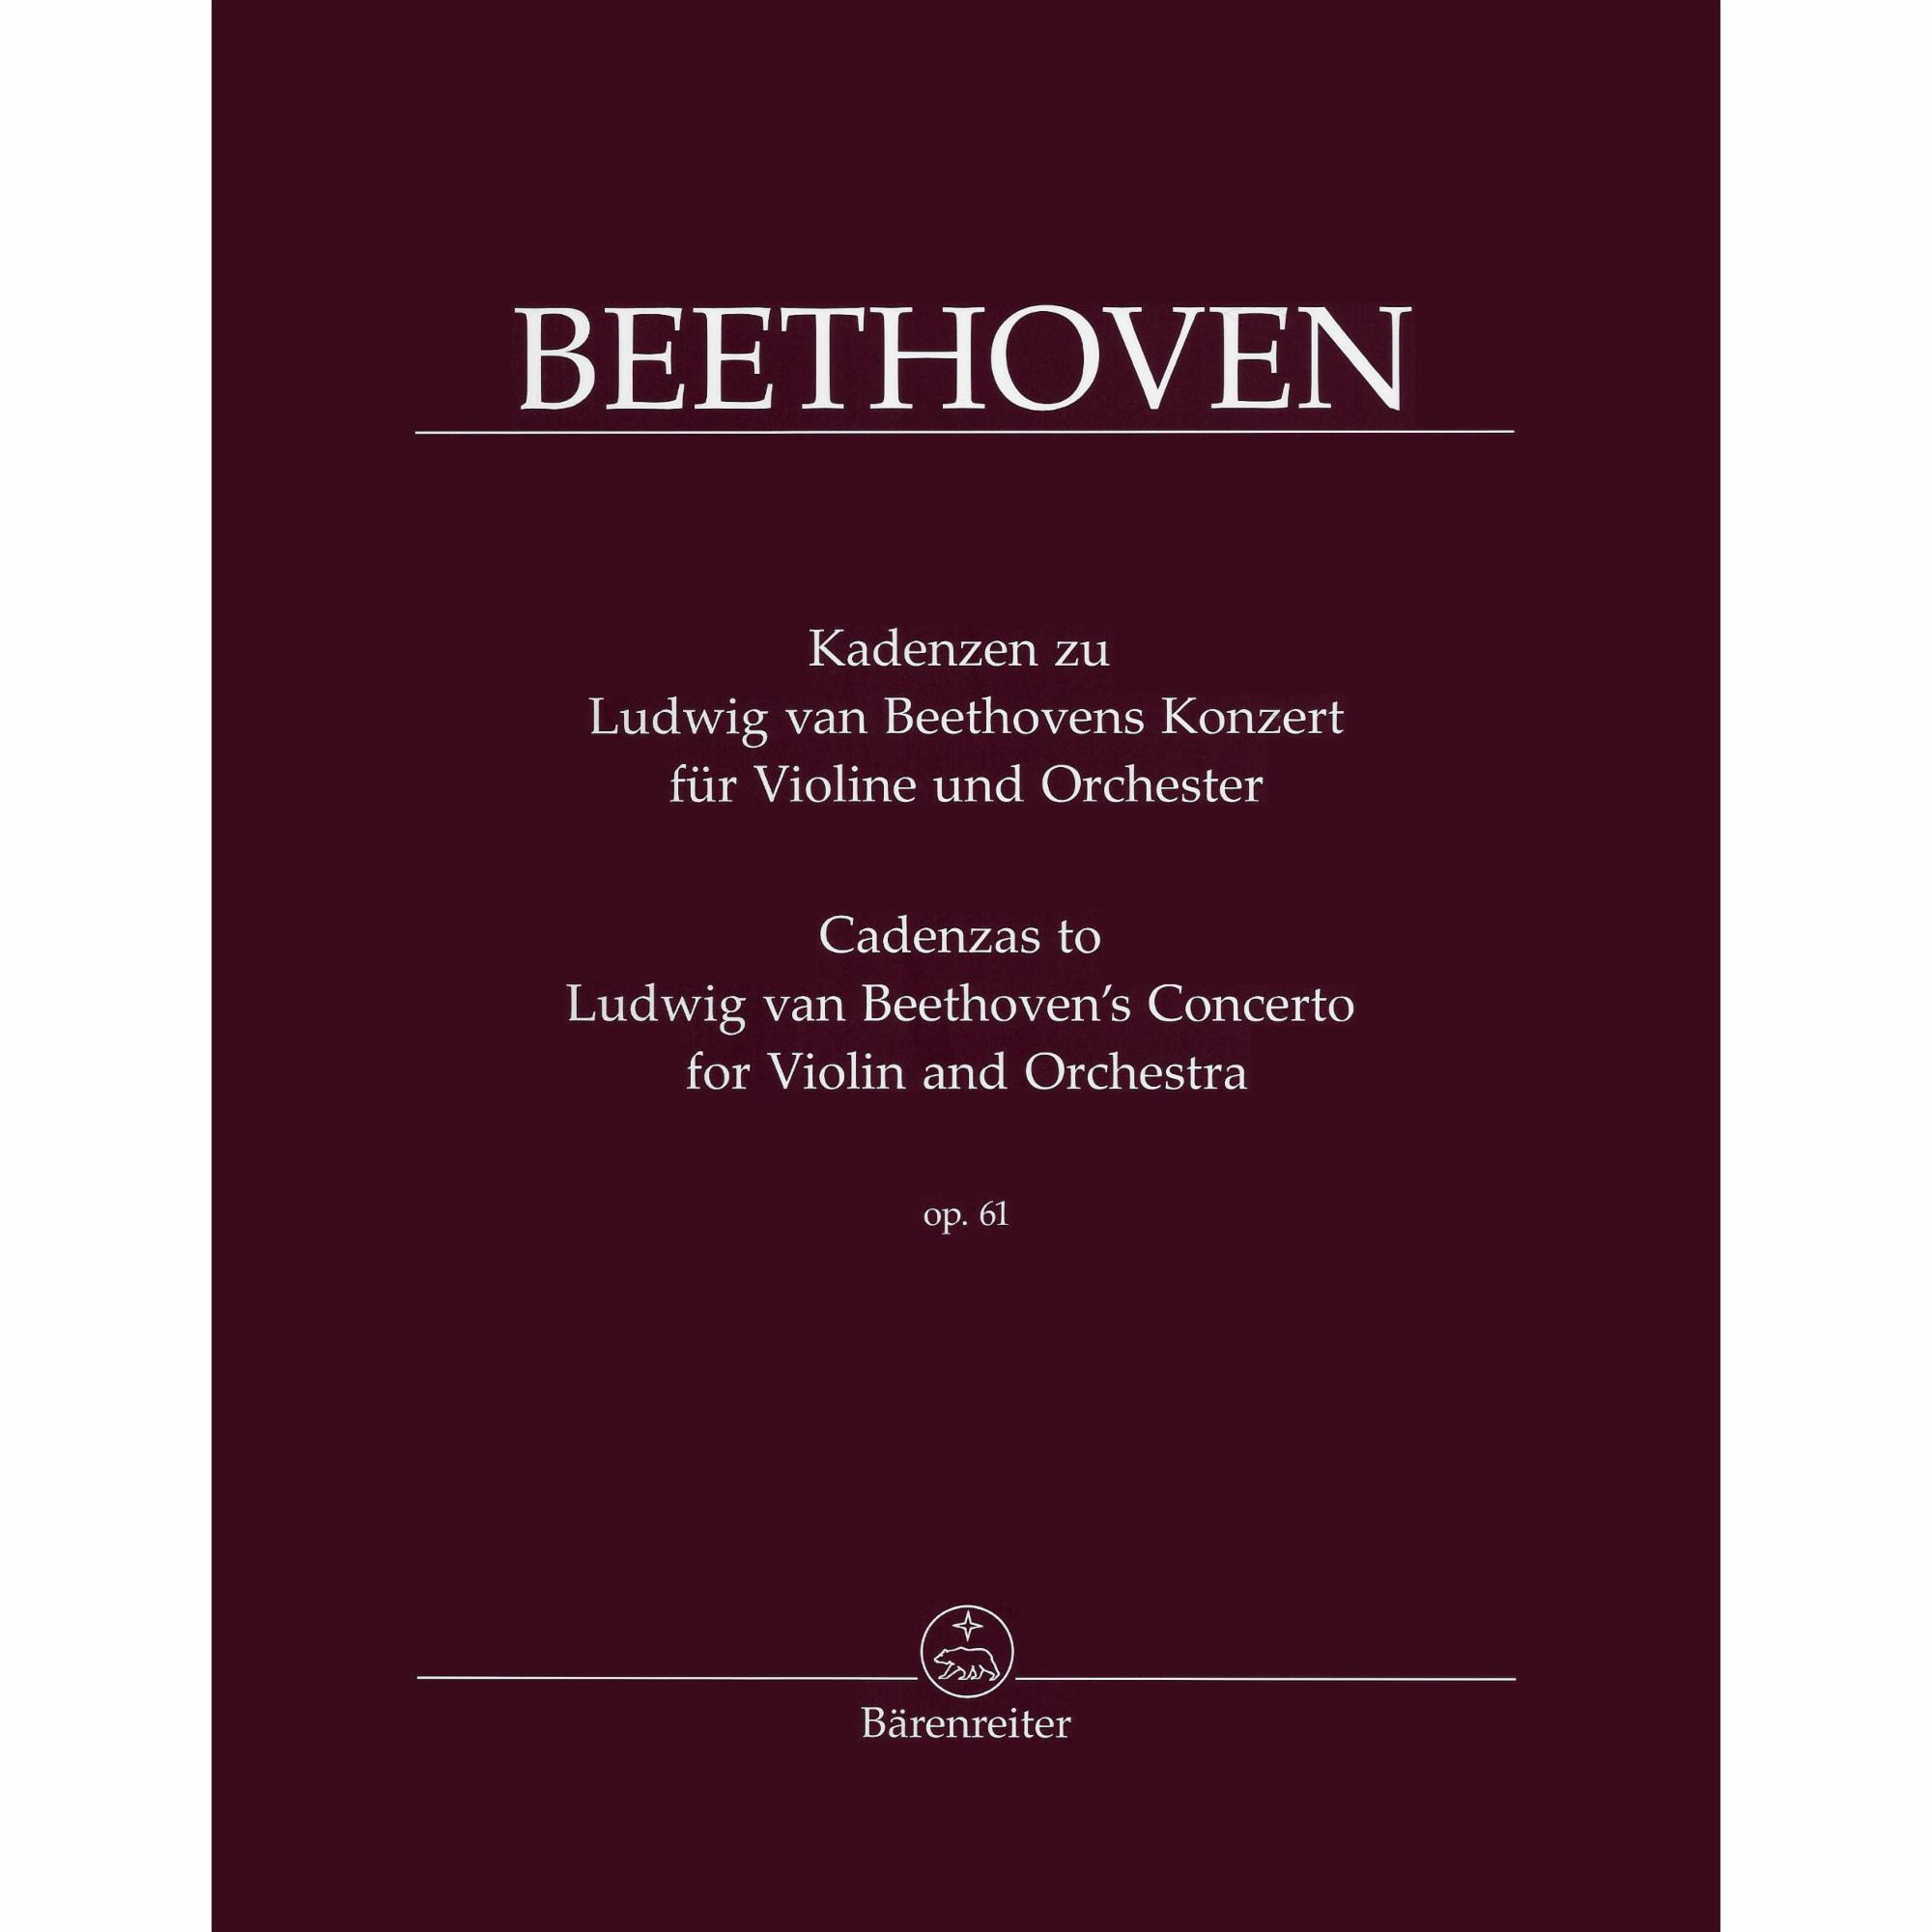 Beethoven -- Cadenzas to Ludwig van Beethoven's Concerto for Violin and Orchestra